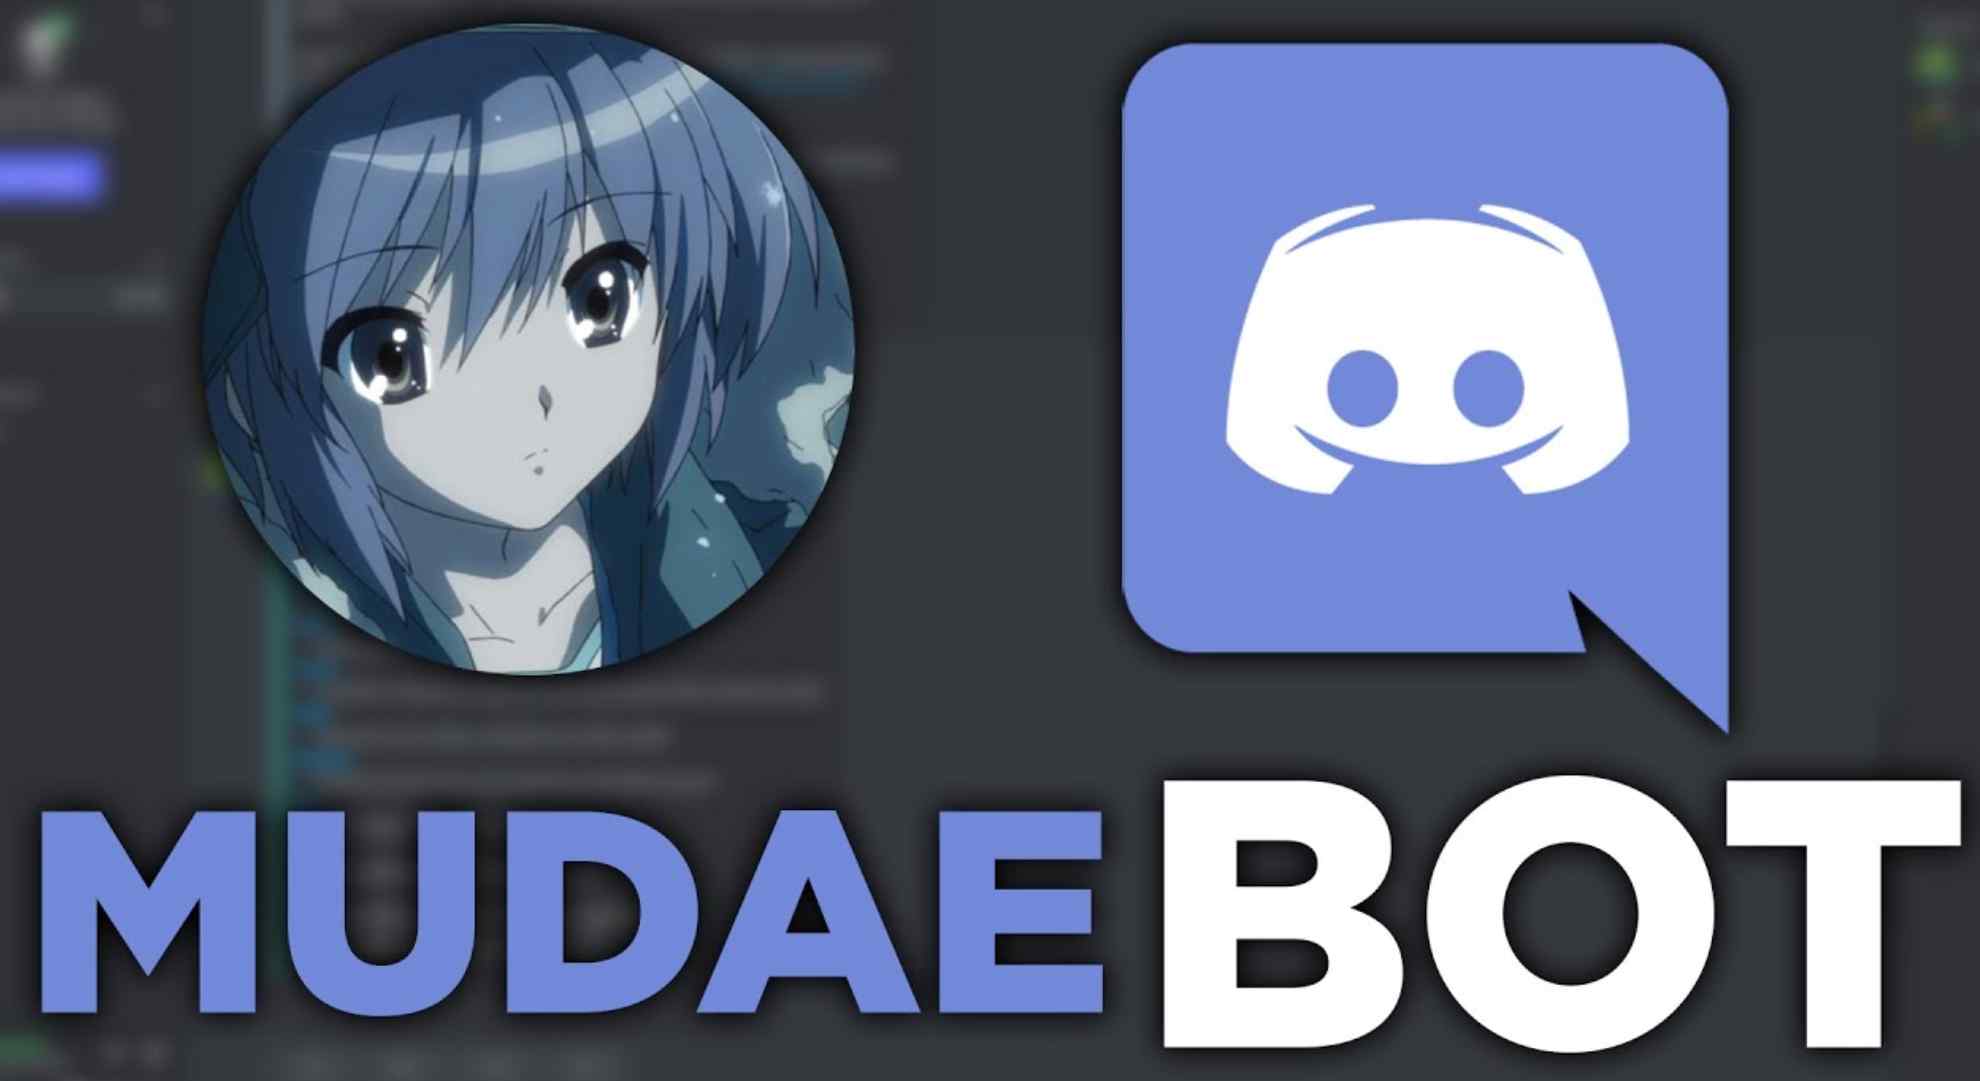 Discord's "Mudae" bot lets you play anime character games within the app.